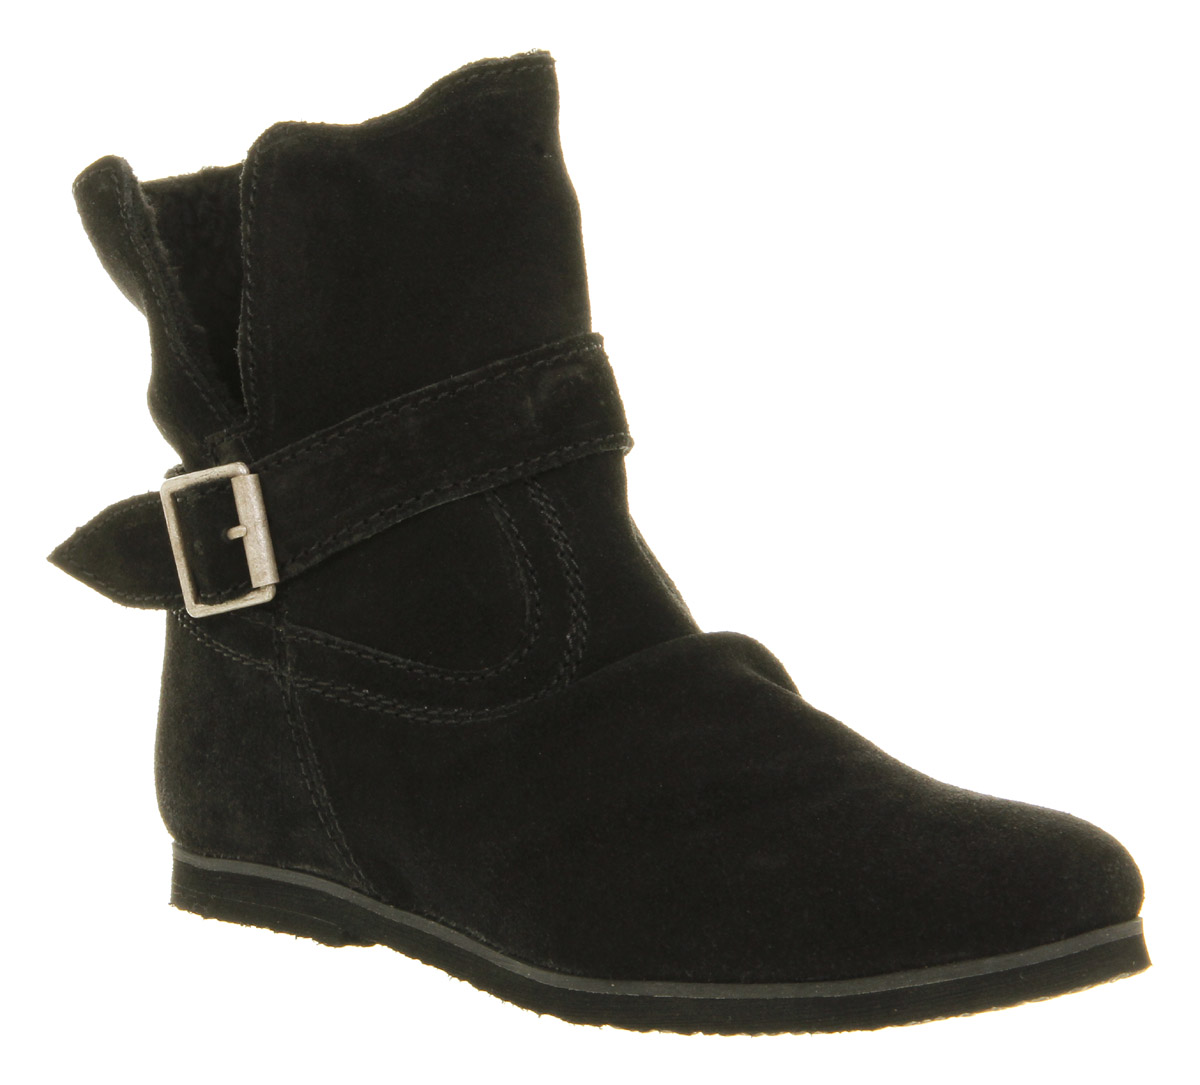 Lyst - Office North Pole Ankle Boot Black Suede in Black